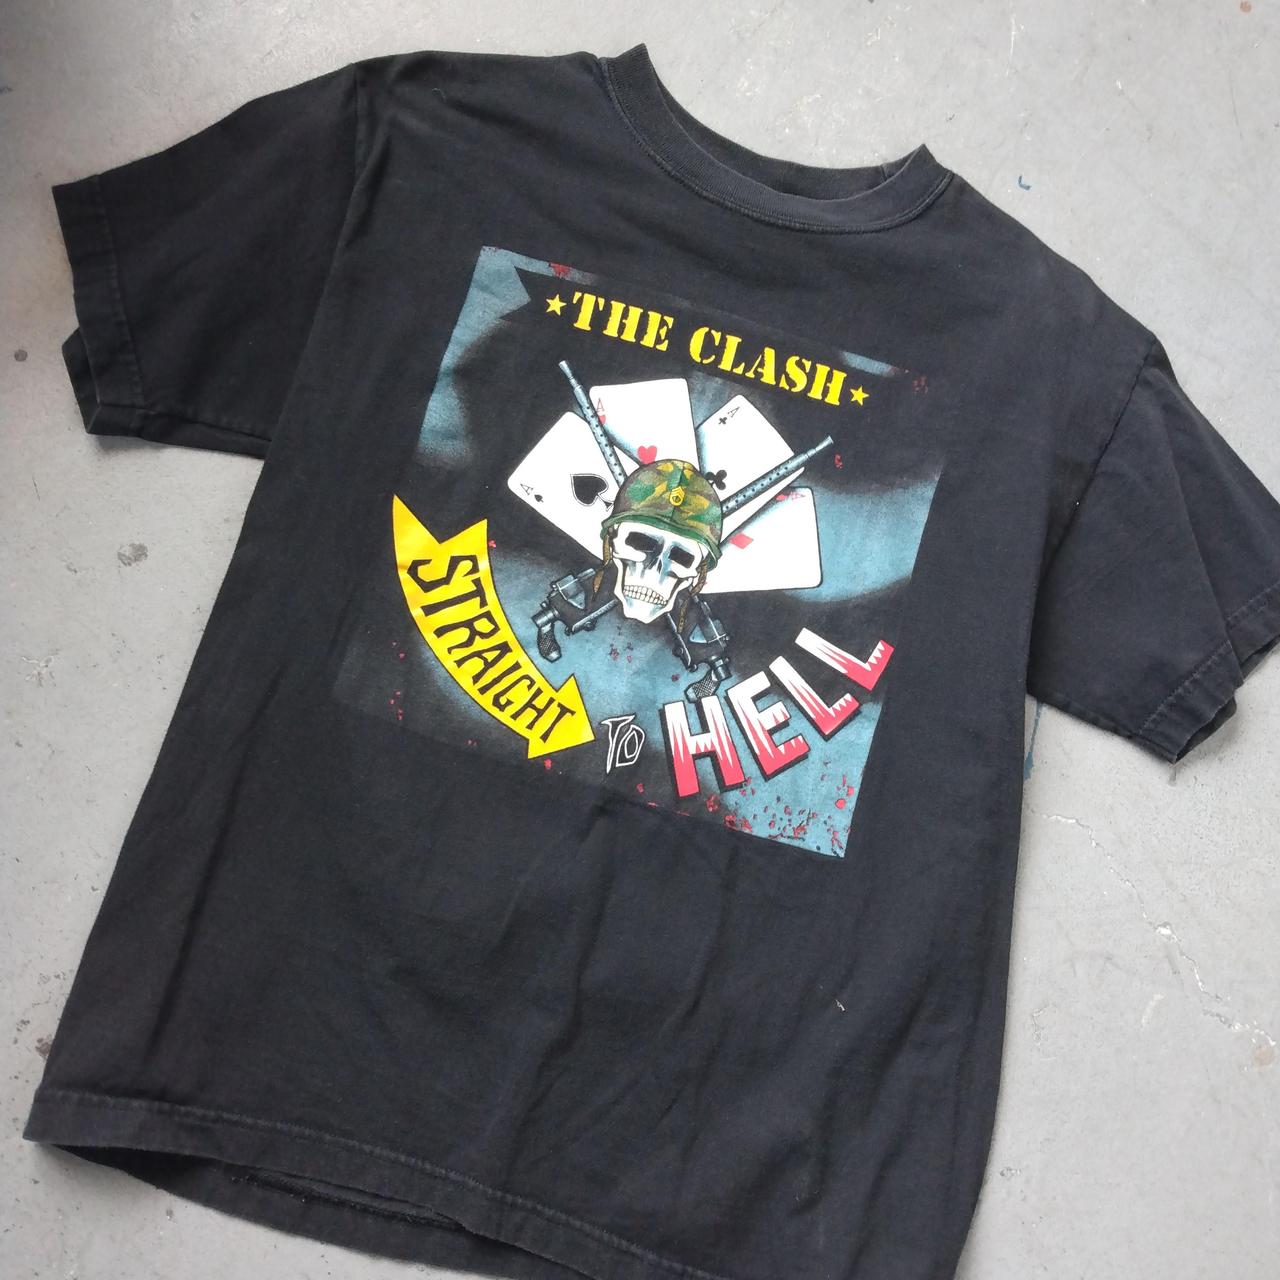 The #Clash #band t-shirt straight to hell graphic on... - Depop